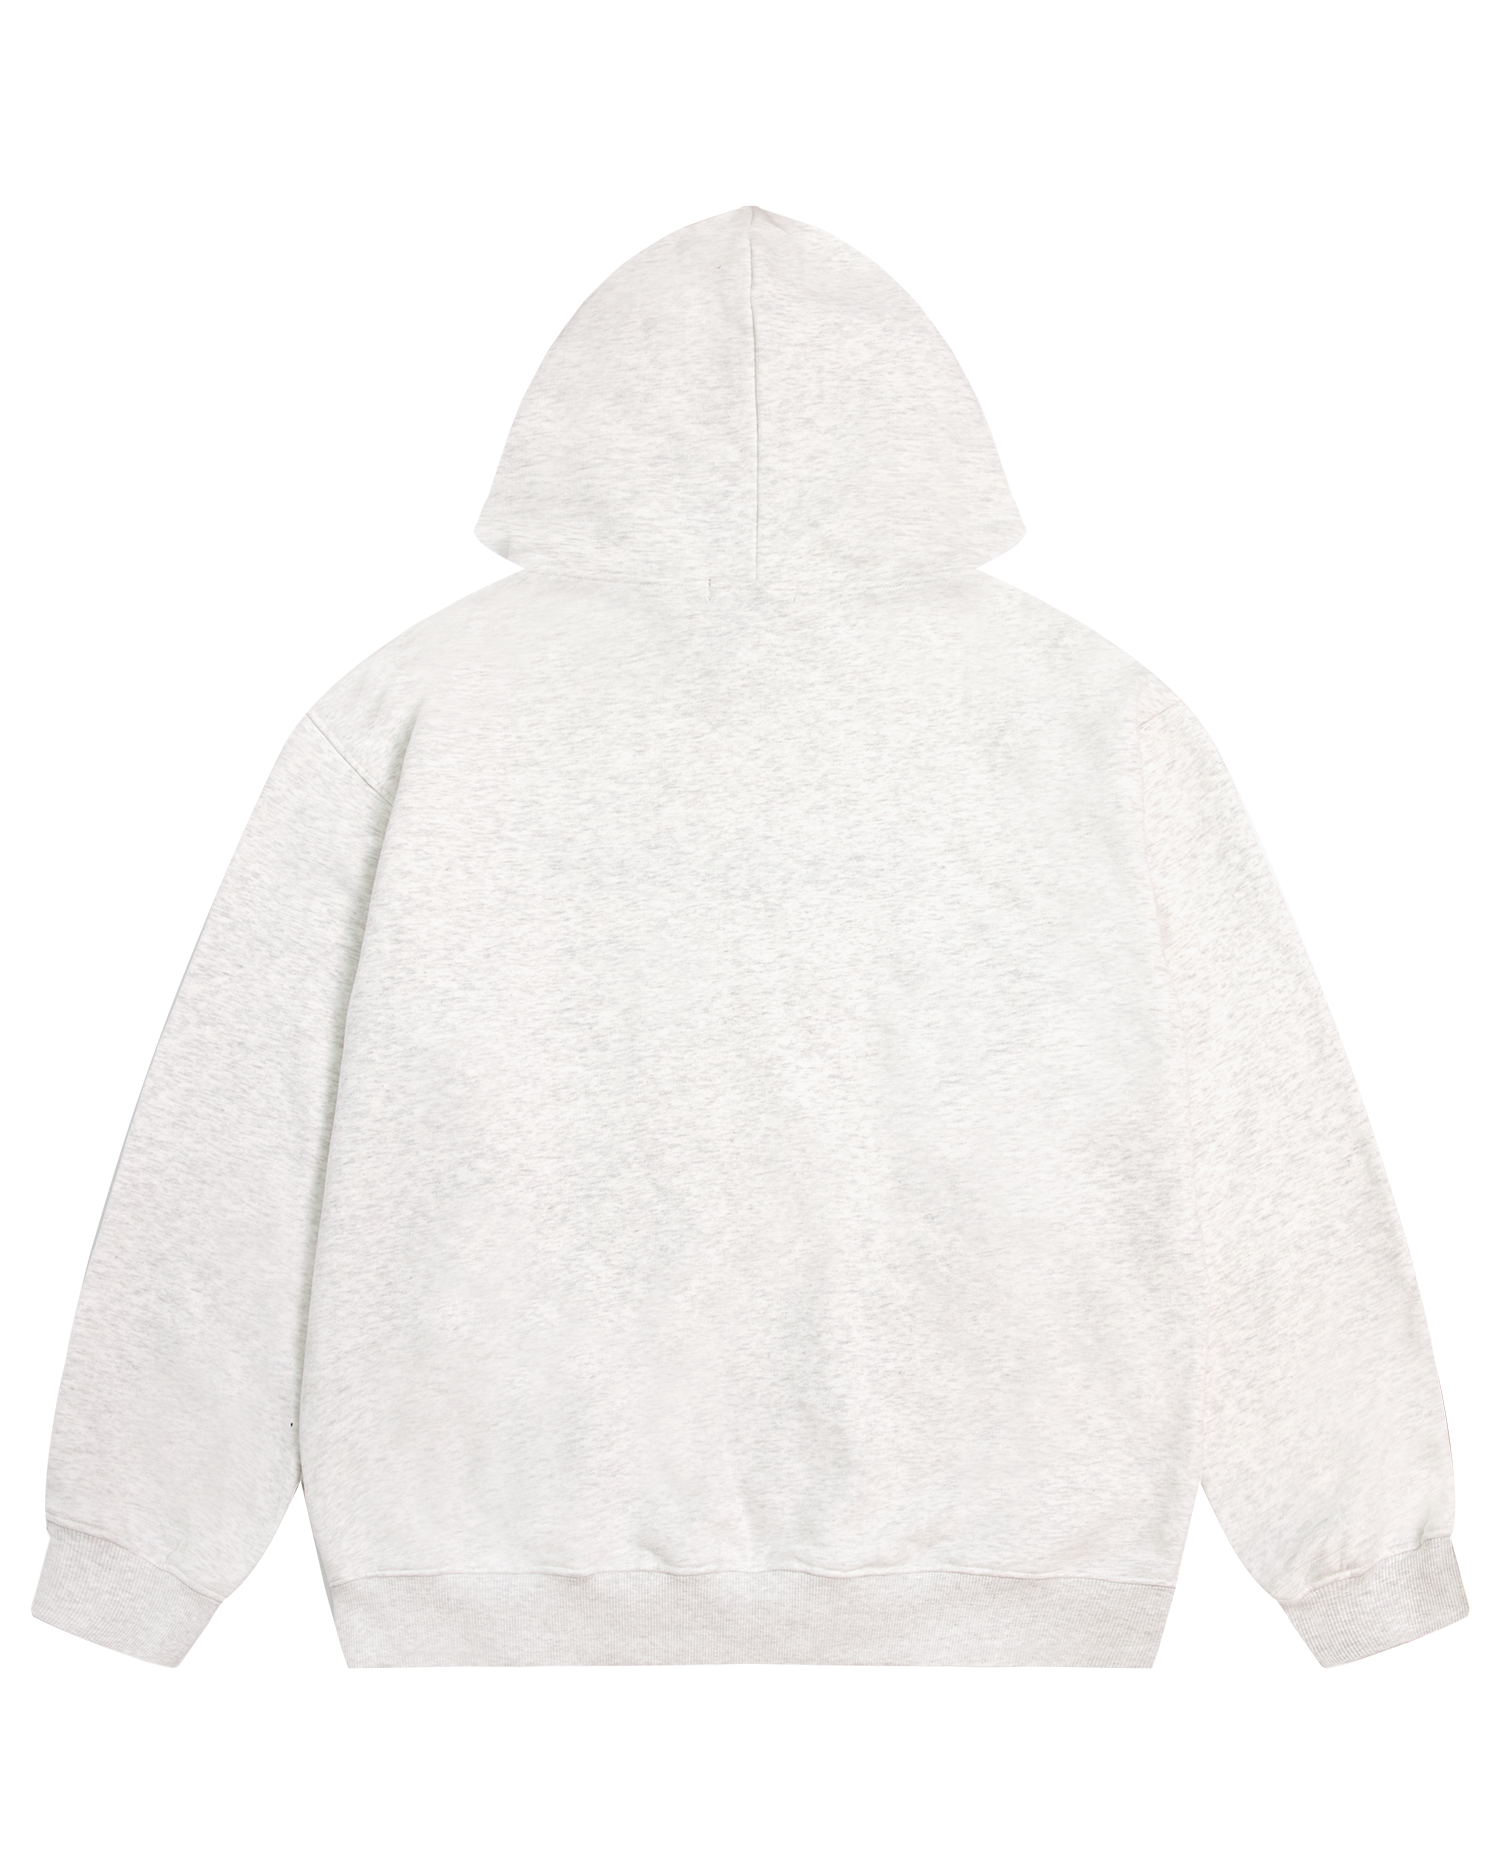 TAKA Original HOME collection draw it yourself Daisy hoodie